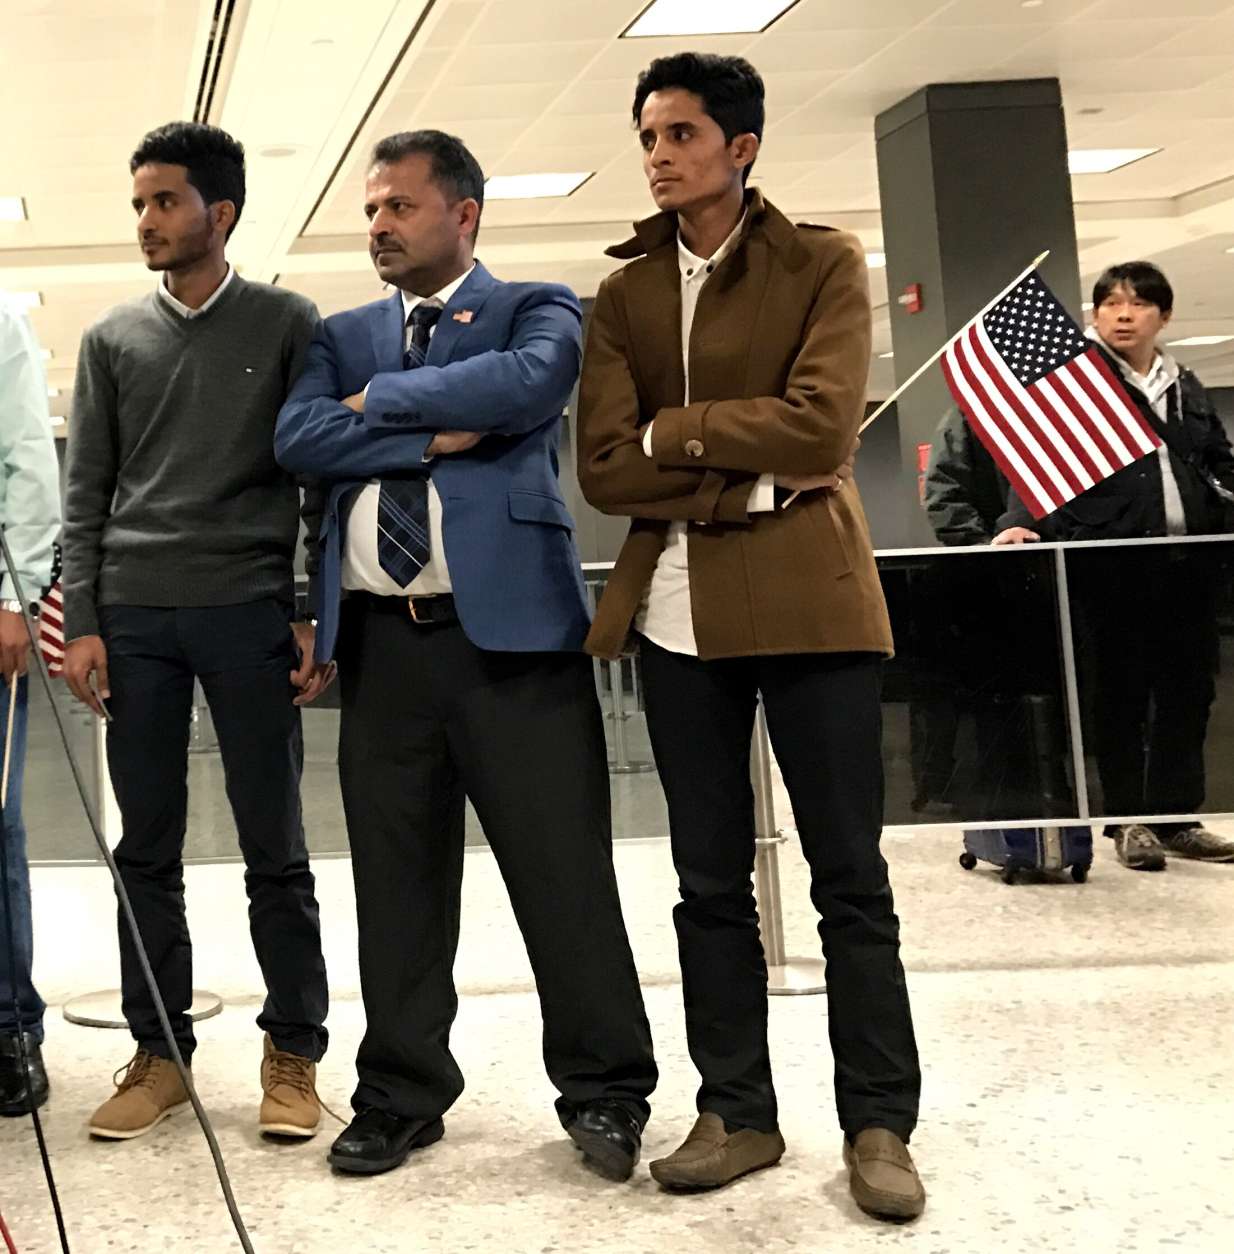 Tareq and Ammar Aziz flank their father, Aquel, after arriving at Dulles International Airport. (WTOP/Neal Augenstein)